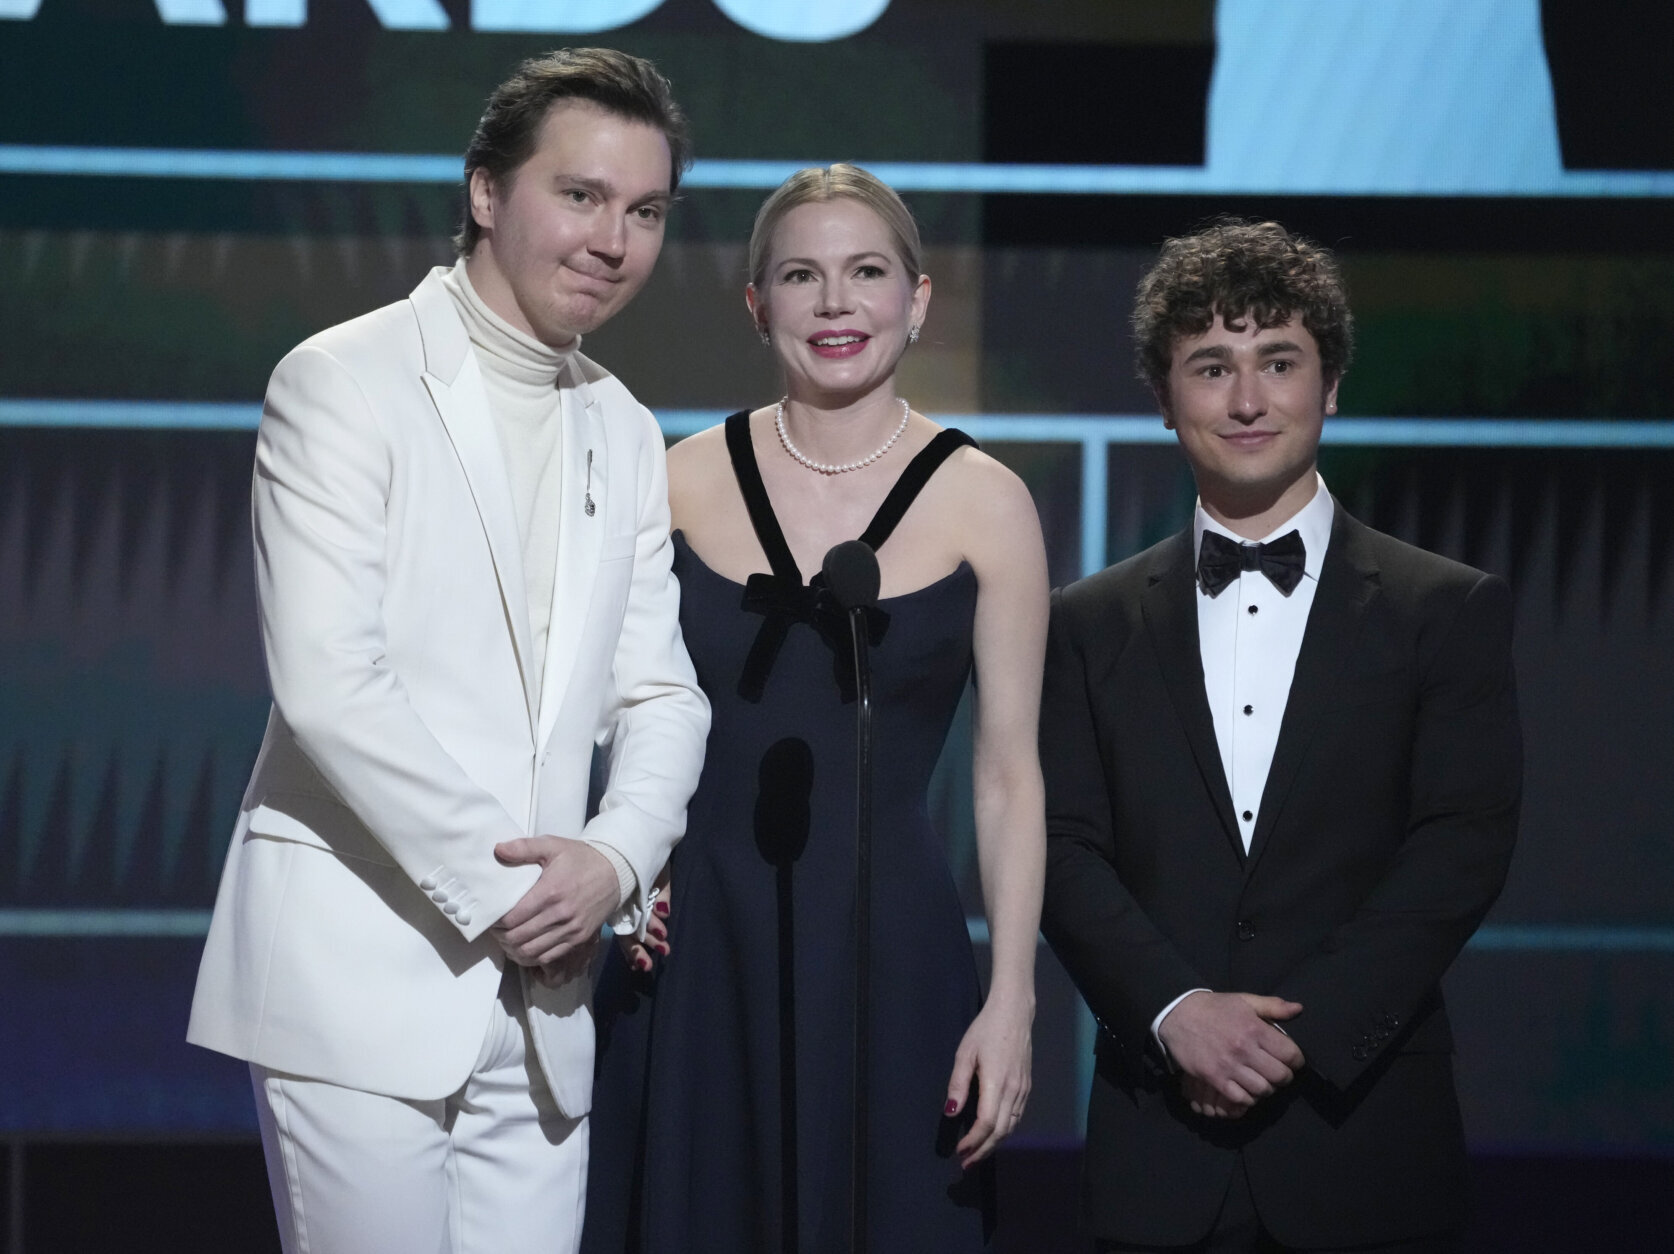 Paul Dano, from left, Michelle Williams and Gabriel LaBelle, members of the cast of "The Fablemans," introduce a clip from their film at the 29th annual Screen Actors Guild Awards on Sunday, Feb. 26, 2023, at the Fairmont Century Plaza in Los Angeles. (AP Photo/Chris Pizzello)